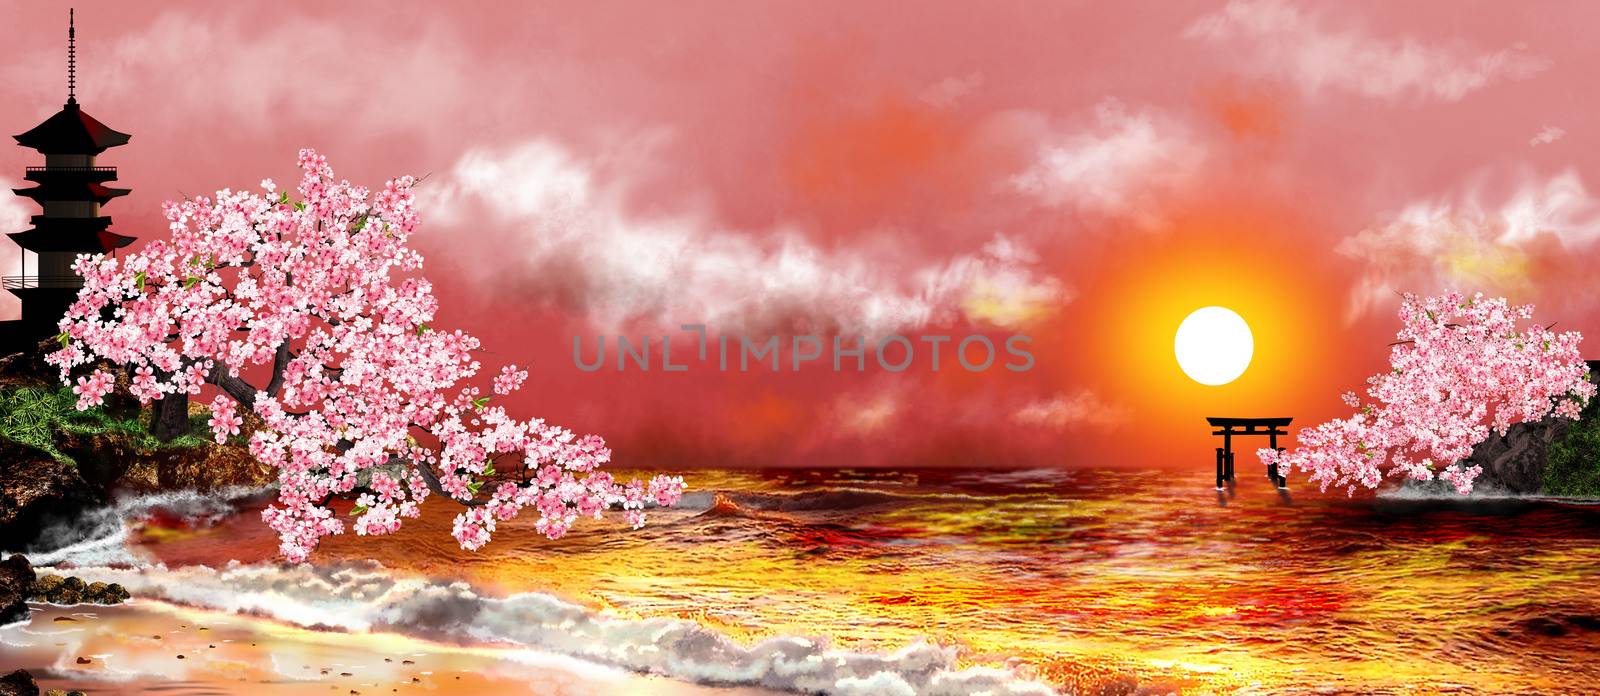 Seascape. Cherry blossoms . Japanese pagoda and the gate against the sky with clouds and sunset. Japanese landscape.